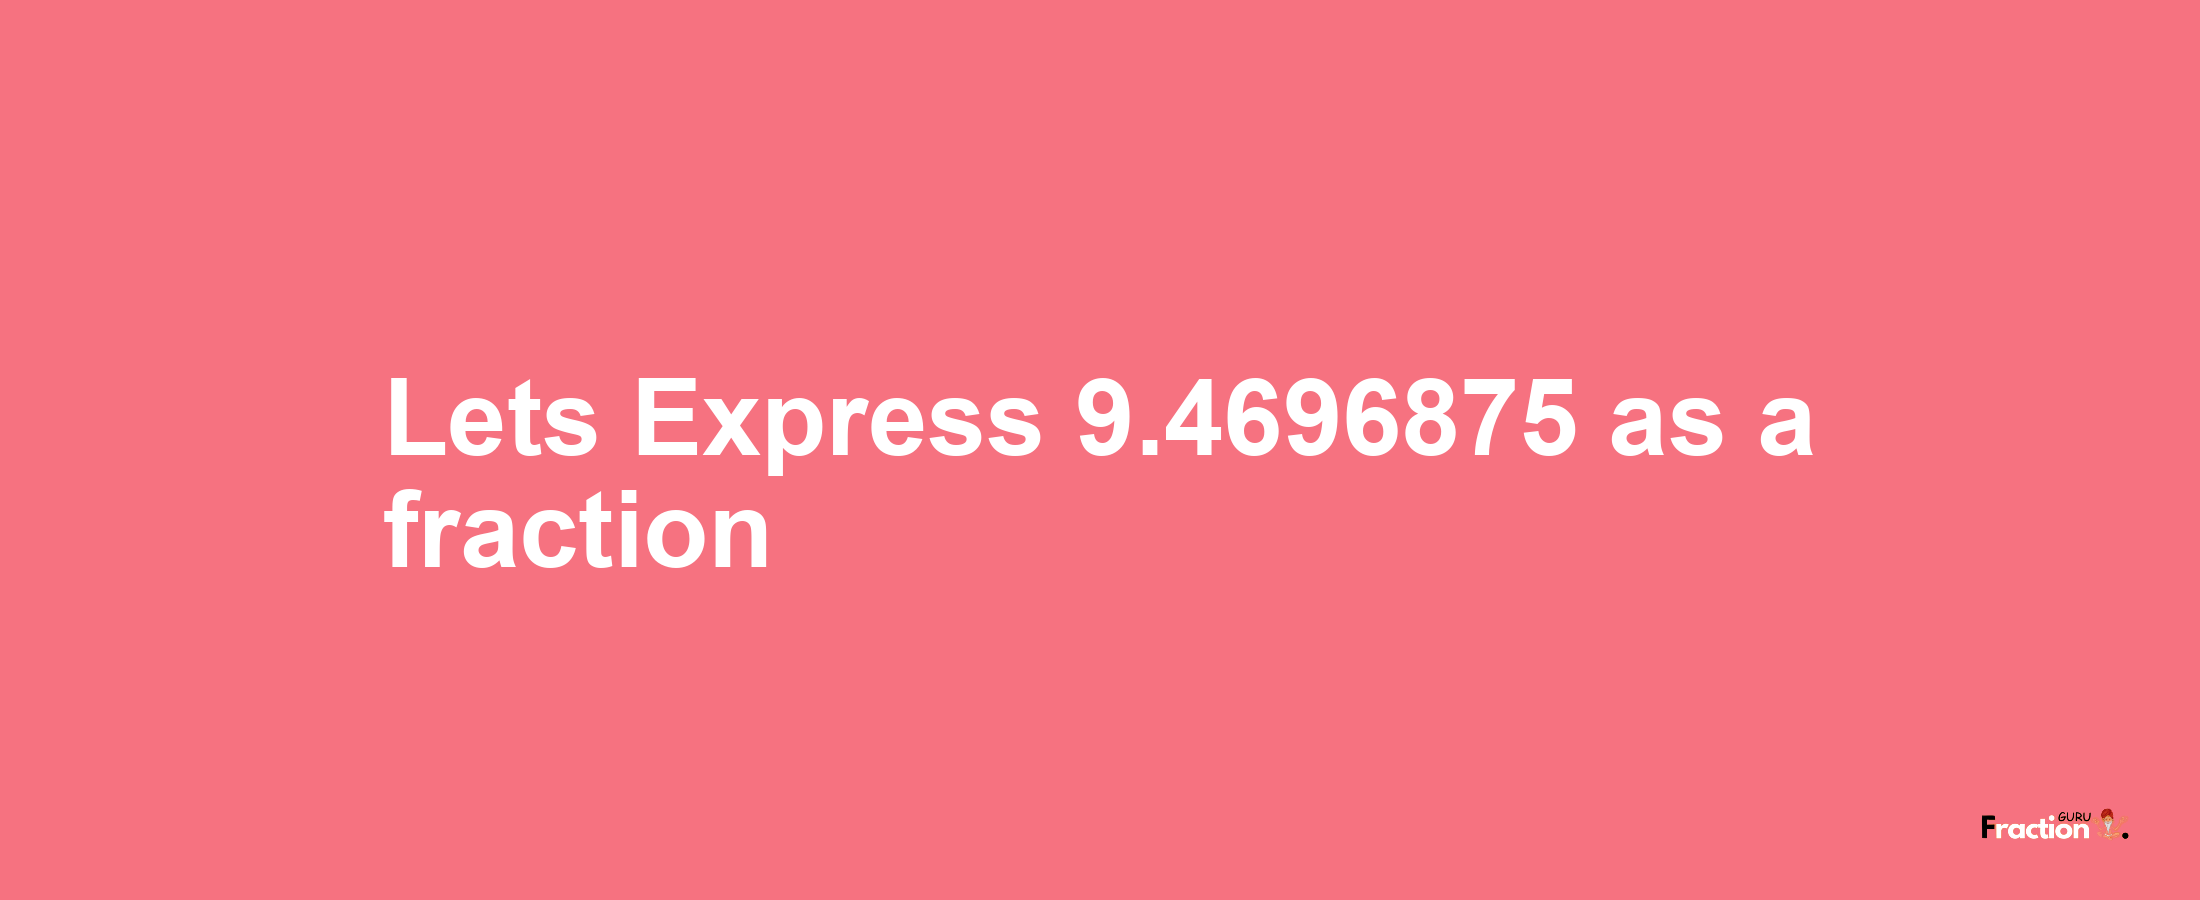 Lets Express 9.4696875 as afraction